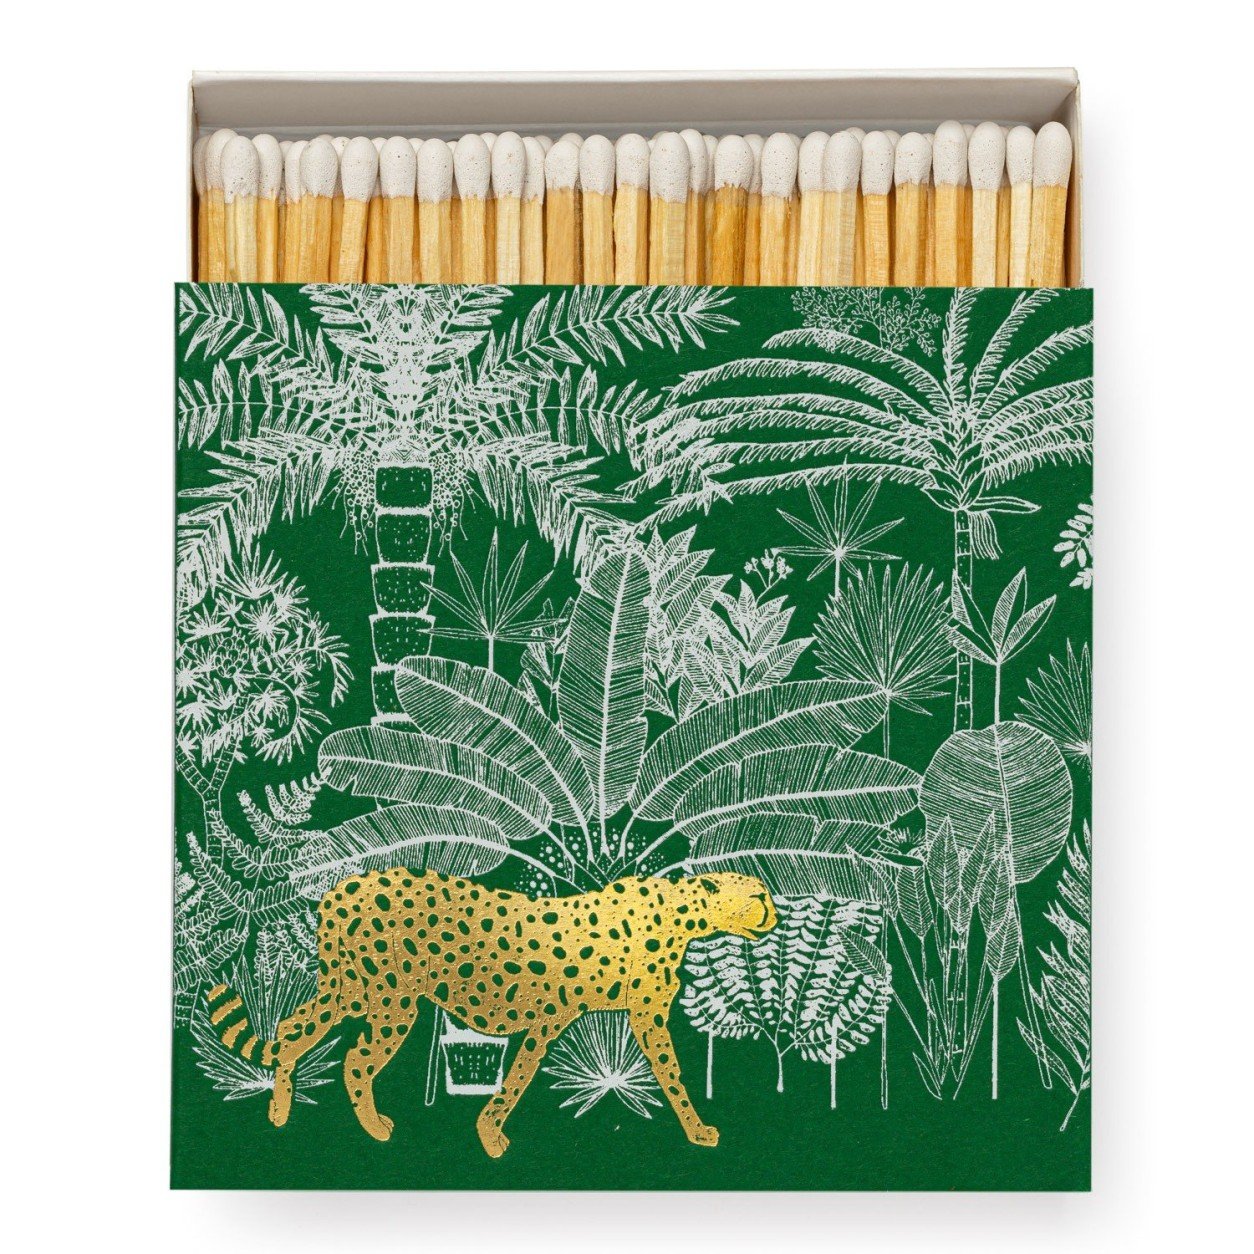 Green Cheetah in Jungle - Archivist Safety Matches